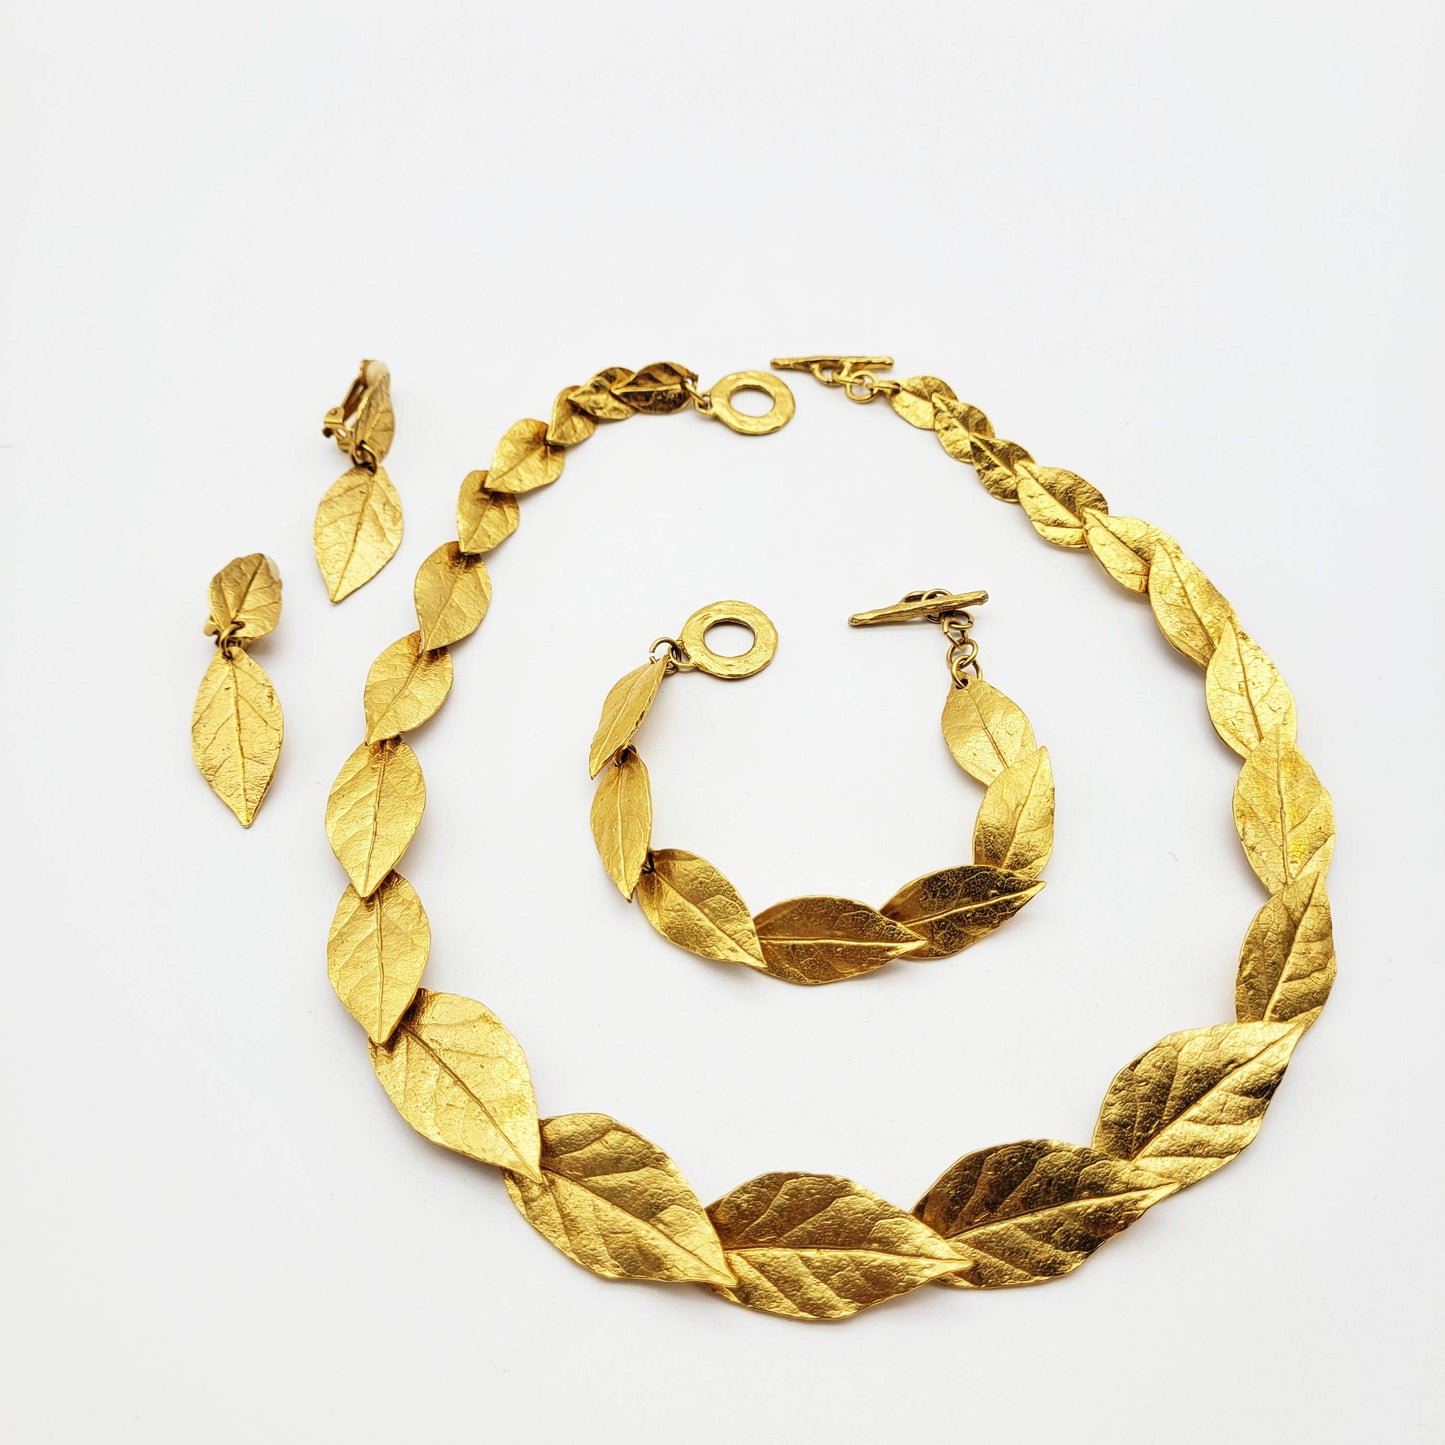 Vintage gold plated jewelry set